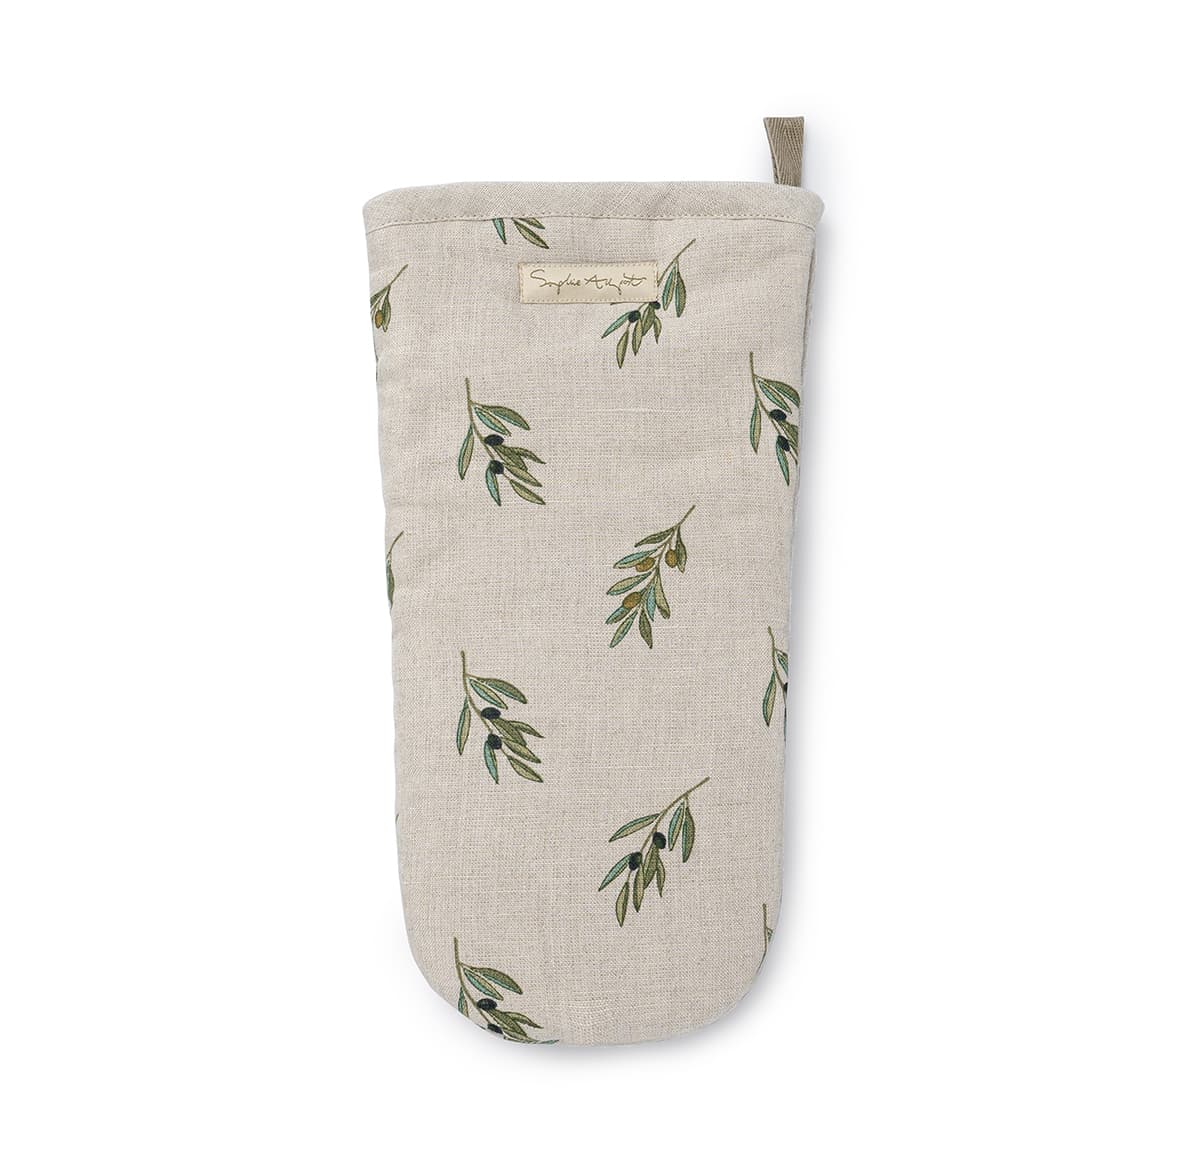 Olive Branches Linen Oven Mitt